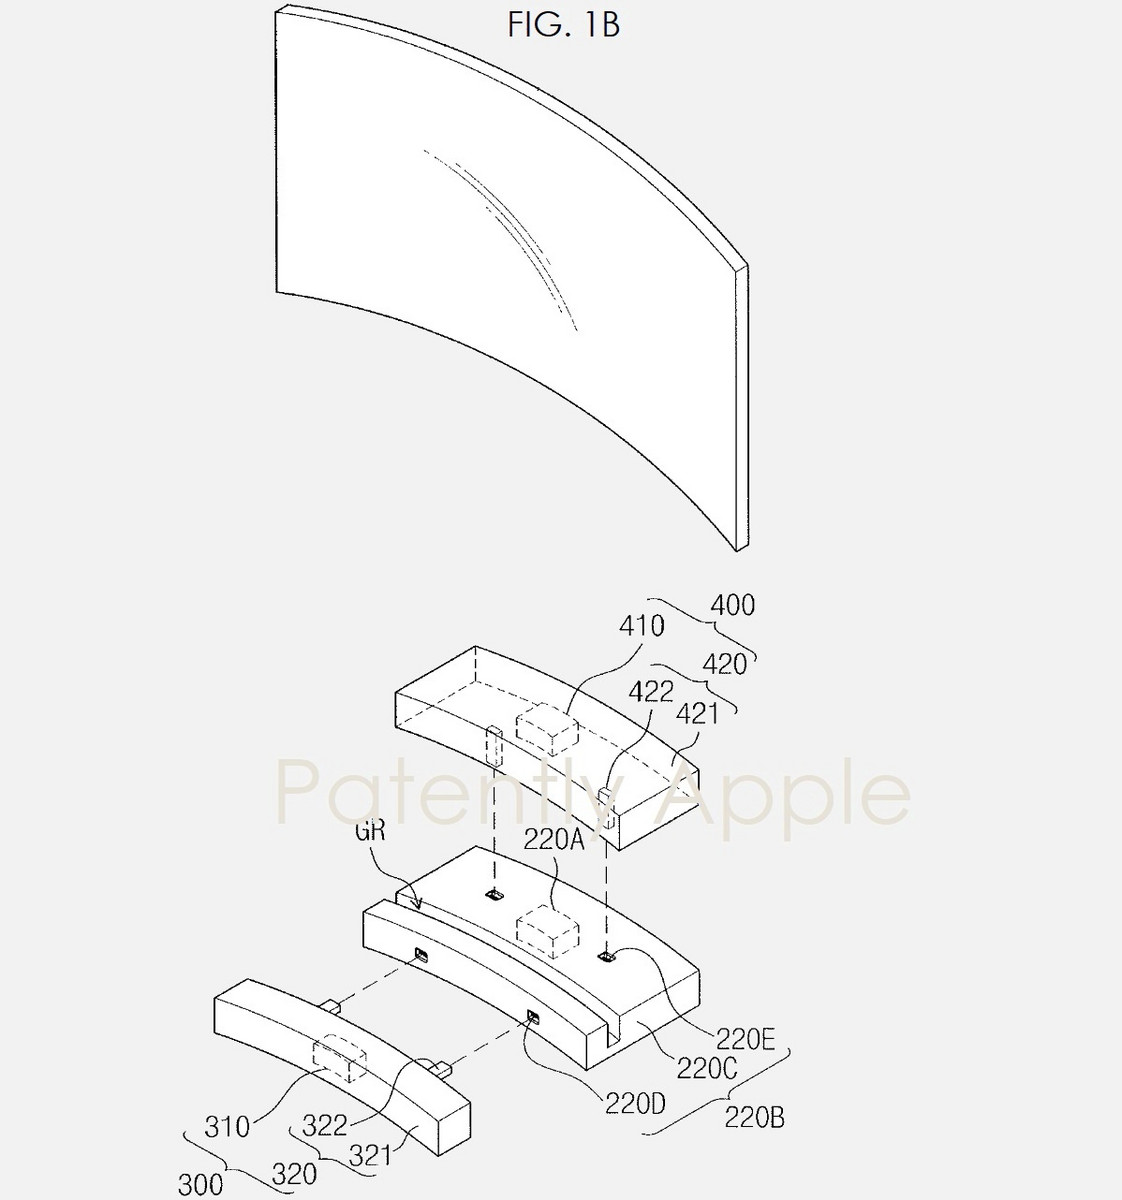 Samsung patent for AiO modular system 600 01